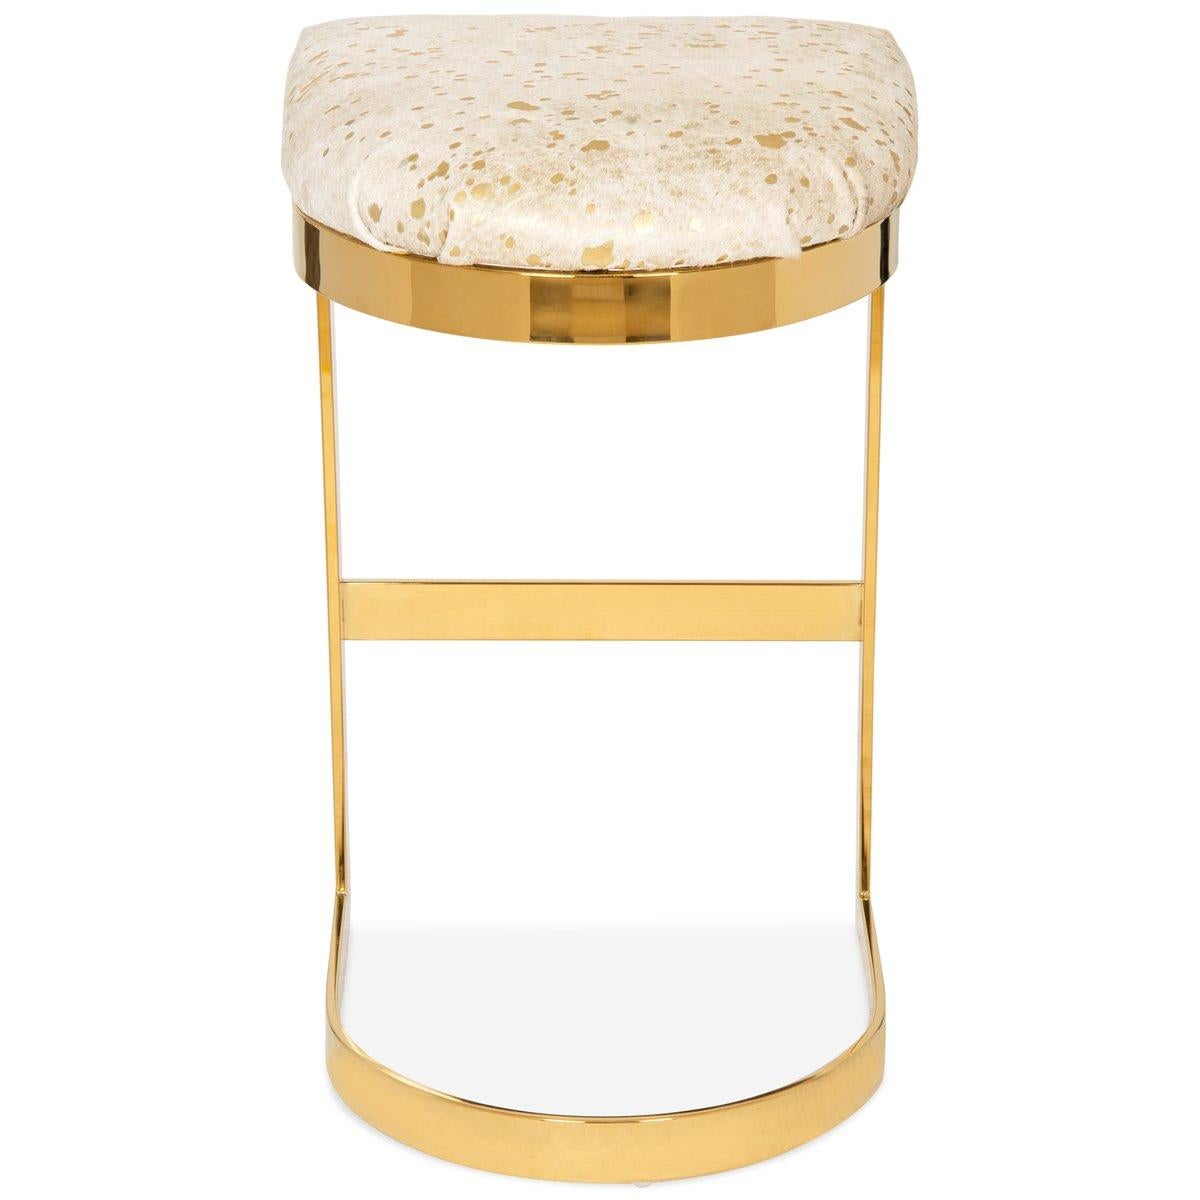 Similar in design to our Ibiza dining chair, except this stool is completely backless. Sitting atop of a brass curved base and featuring a rounded seat cushion adding comfort and style to your entertaining space. What an elegant way to have meals